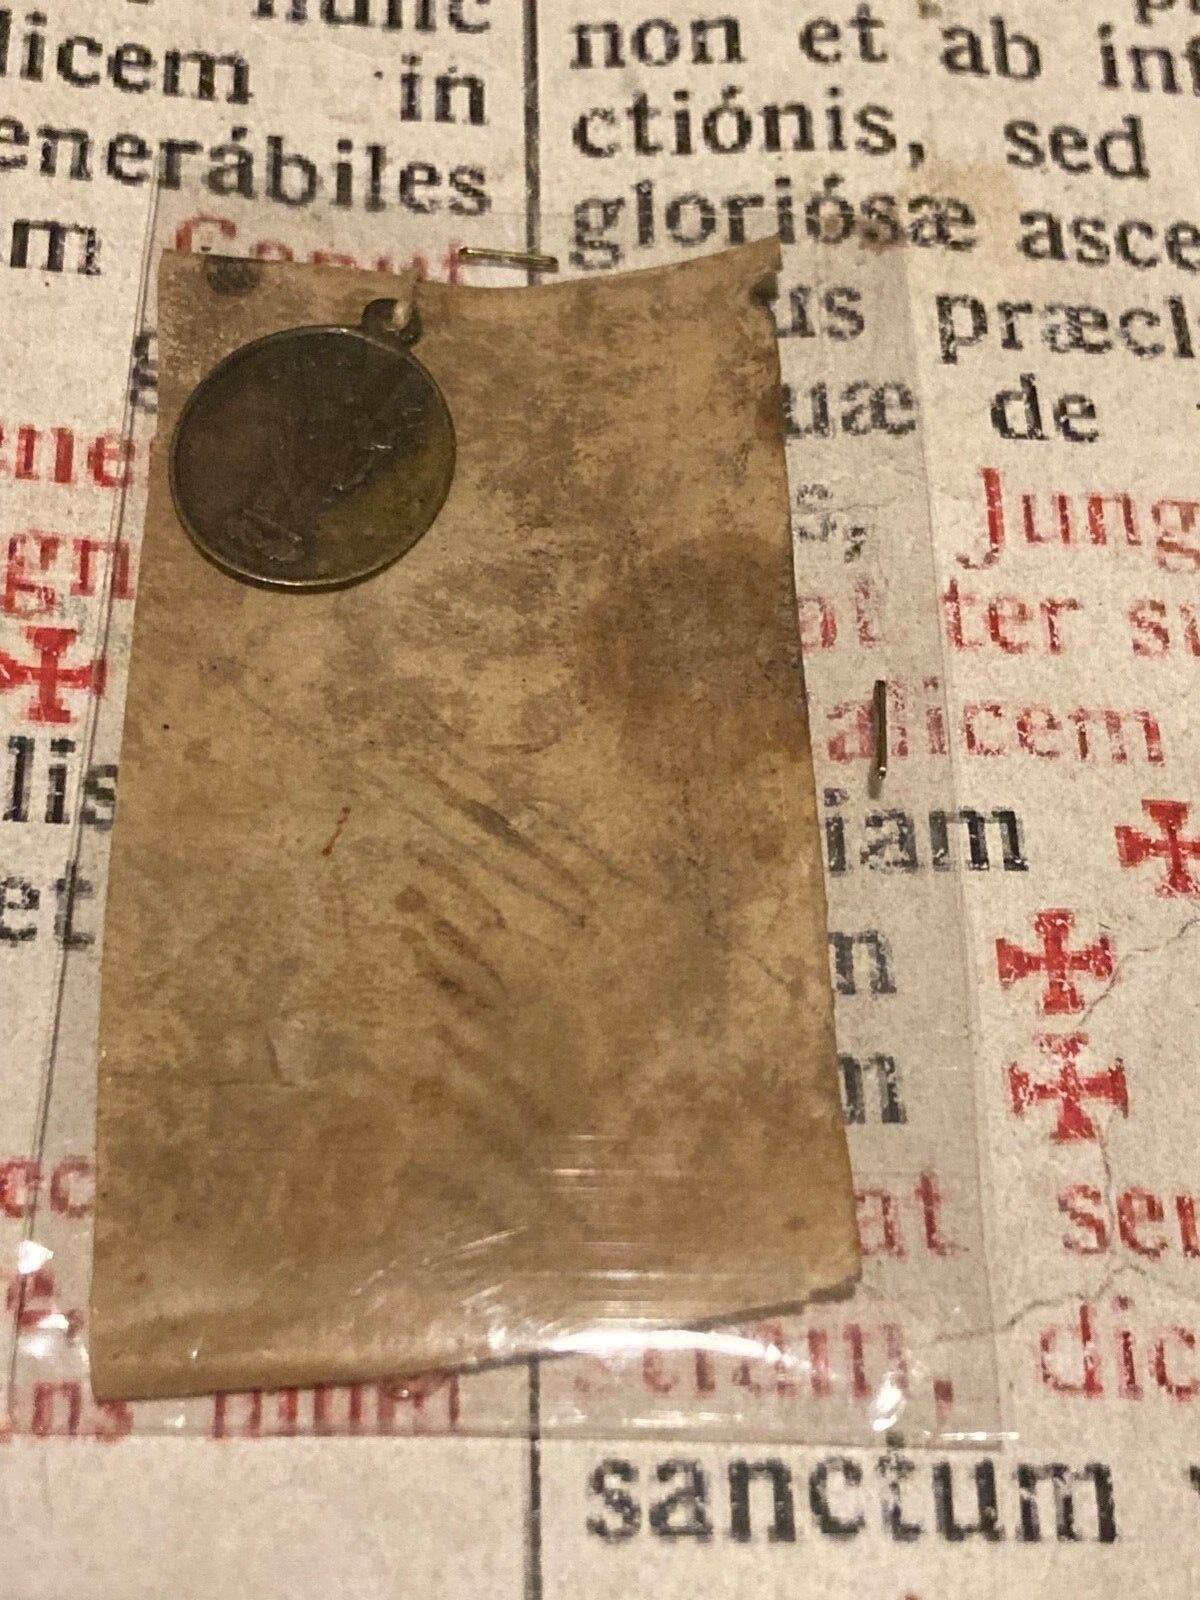 RARE ANCIENT RELIC Saint Lucia : Parchment with St Lucia medal - Good deal 